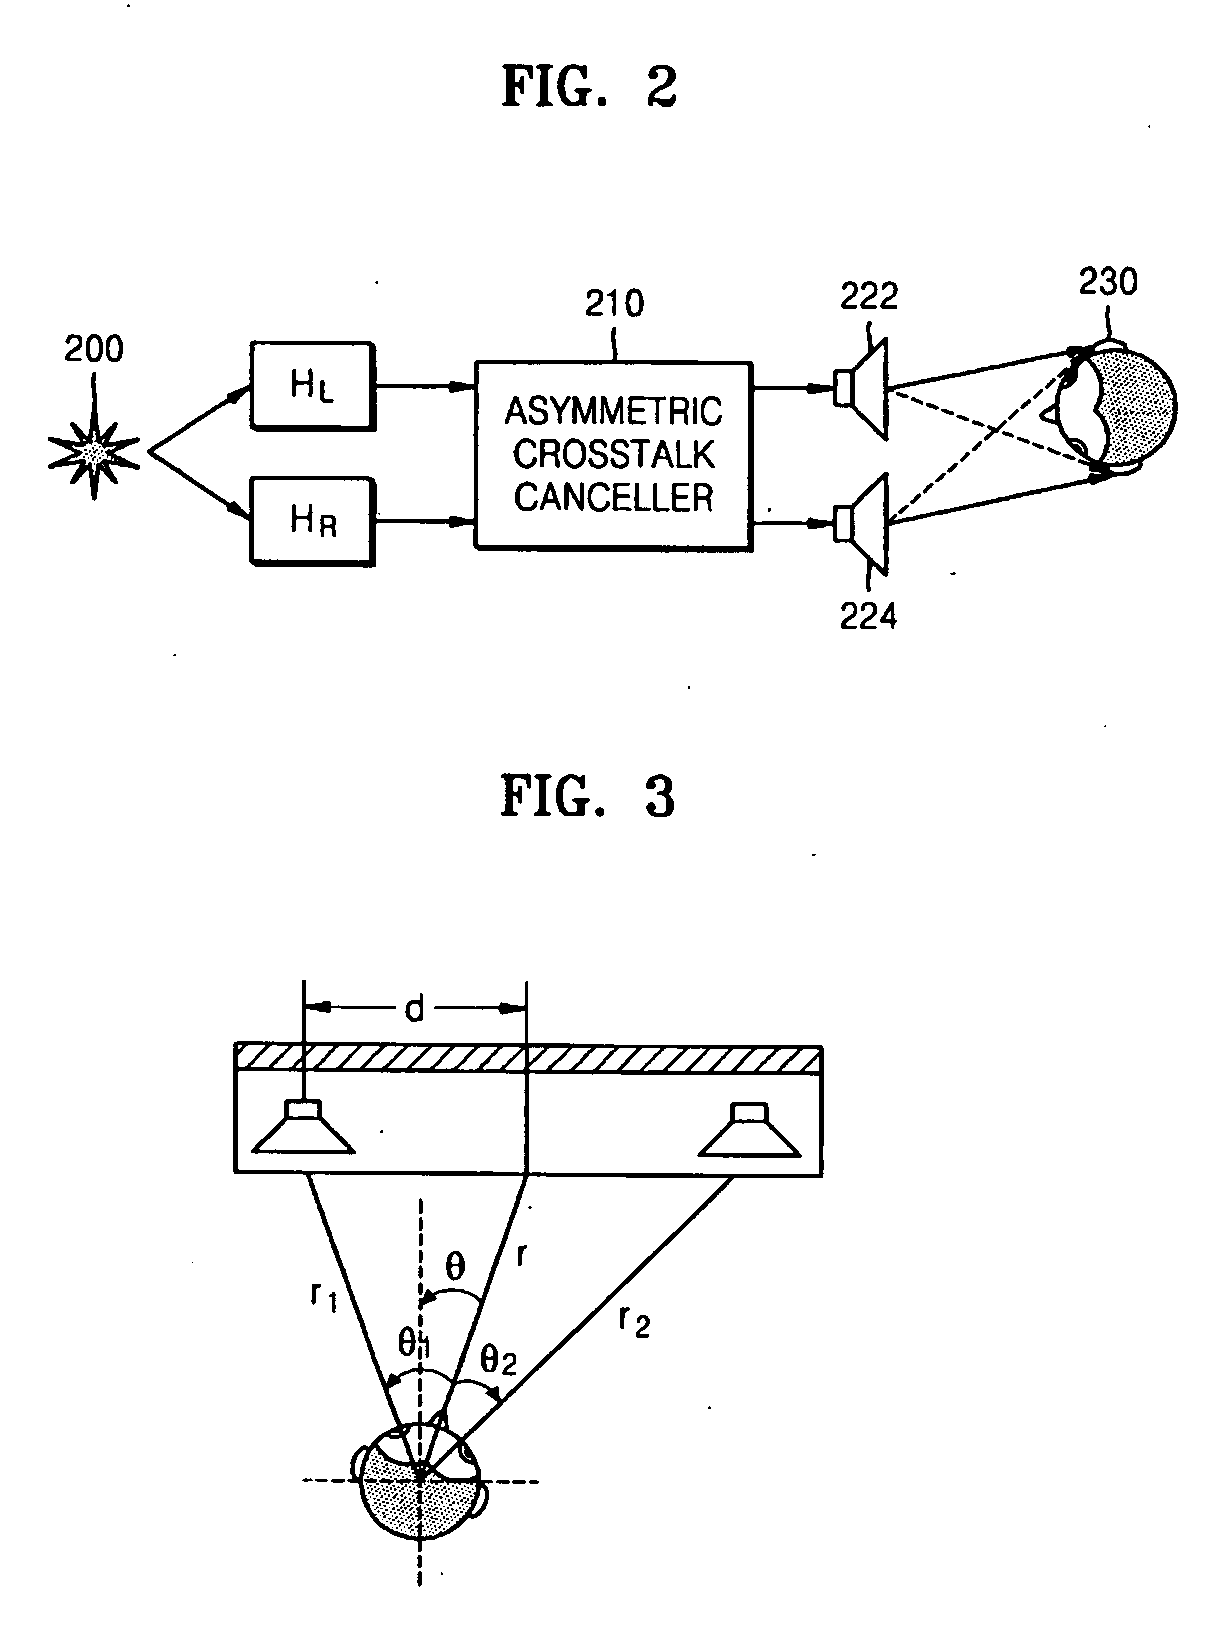 Apparatus and method of reproducing virtual sound of two channels based on listener's position